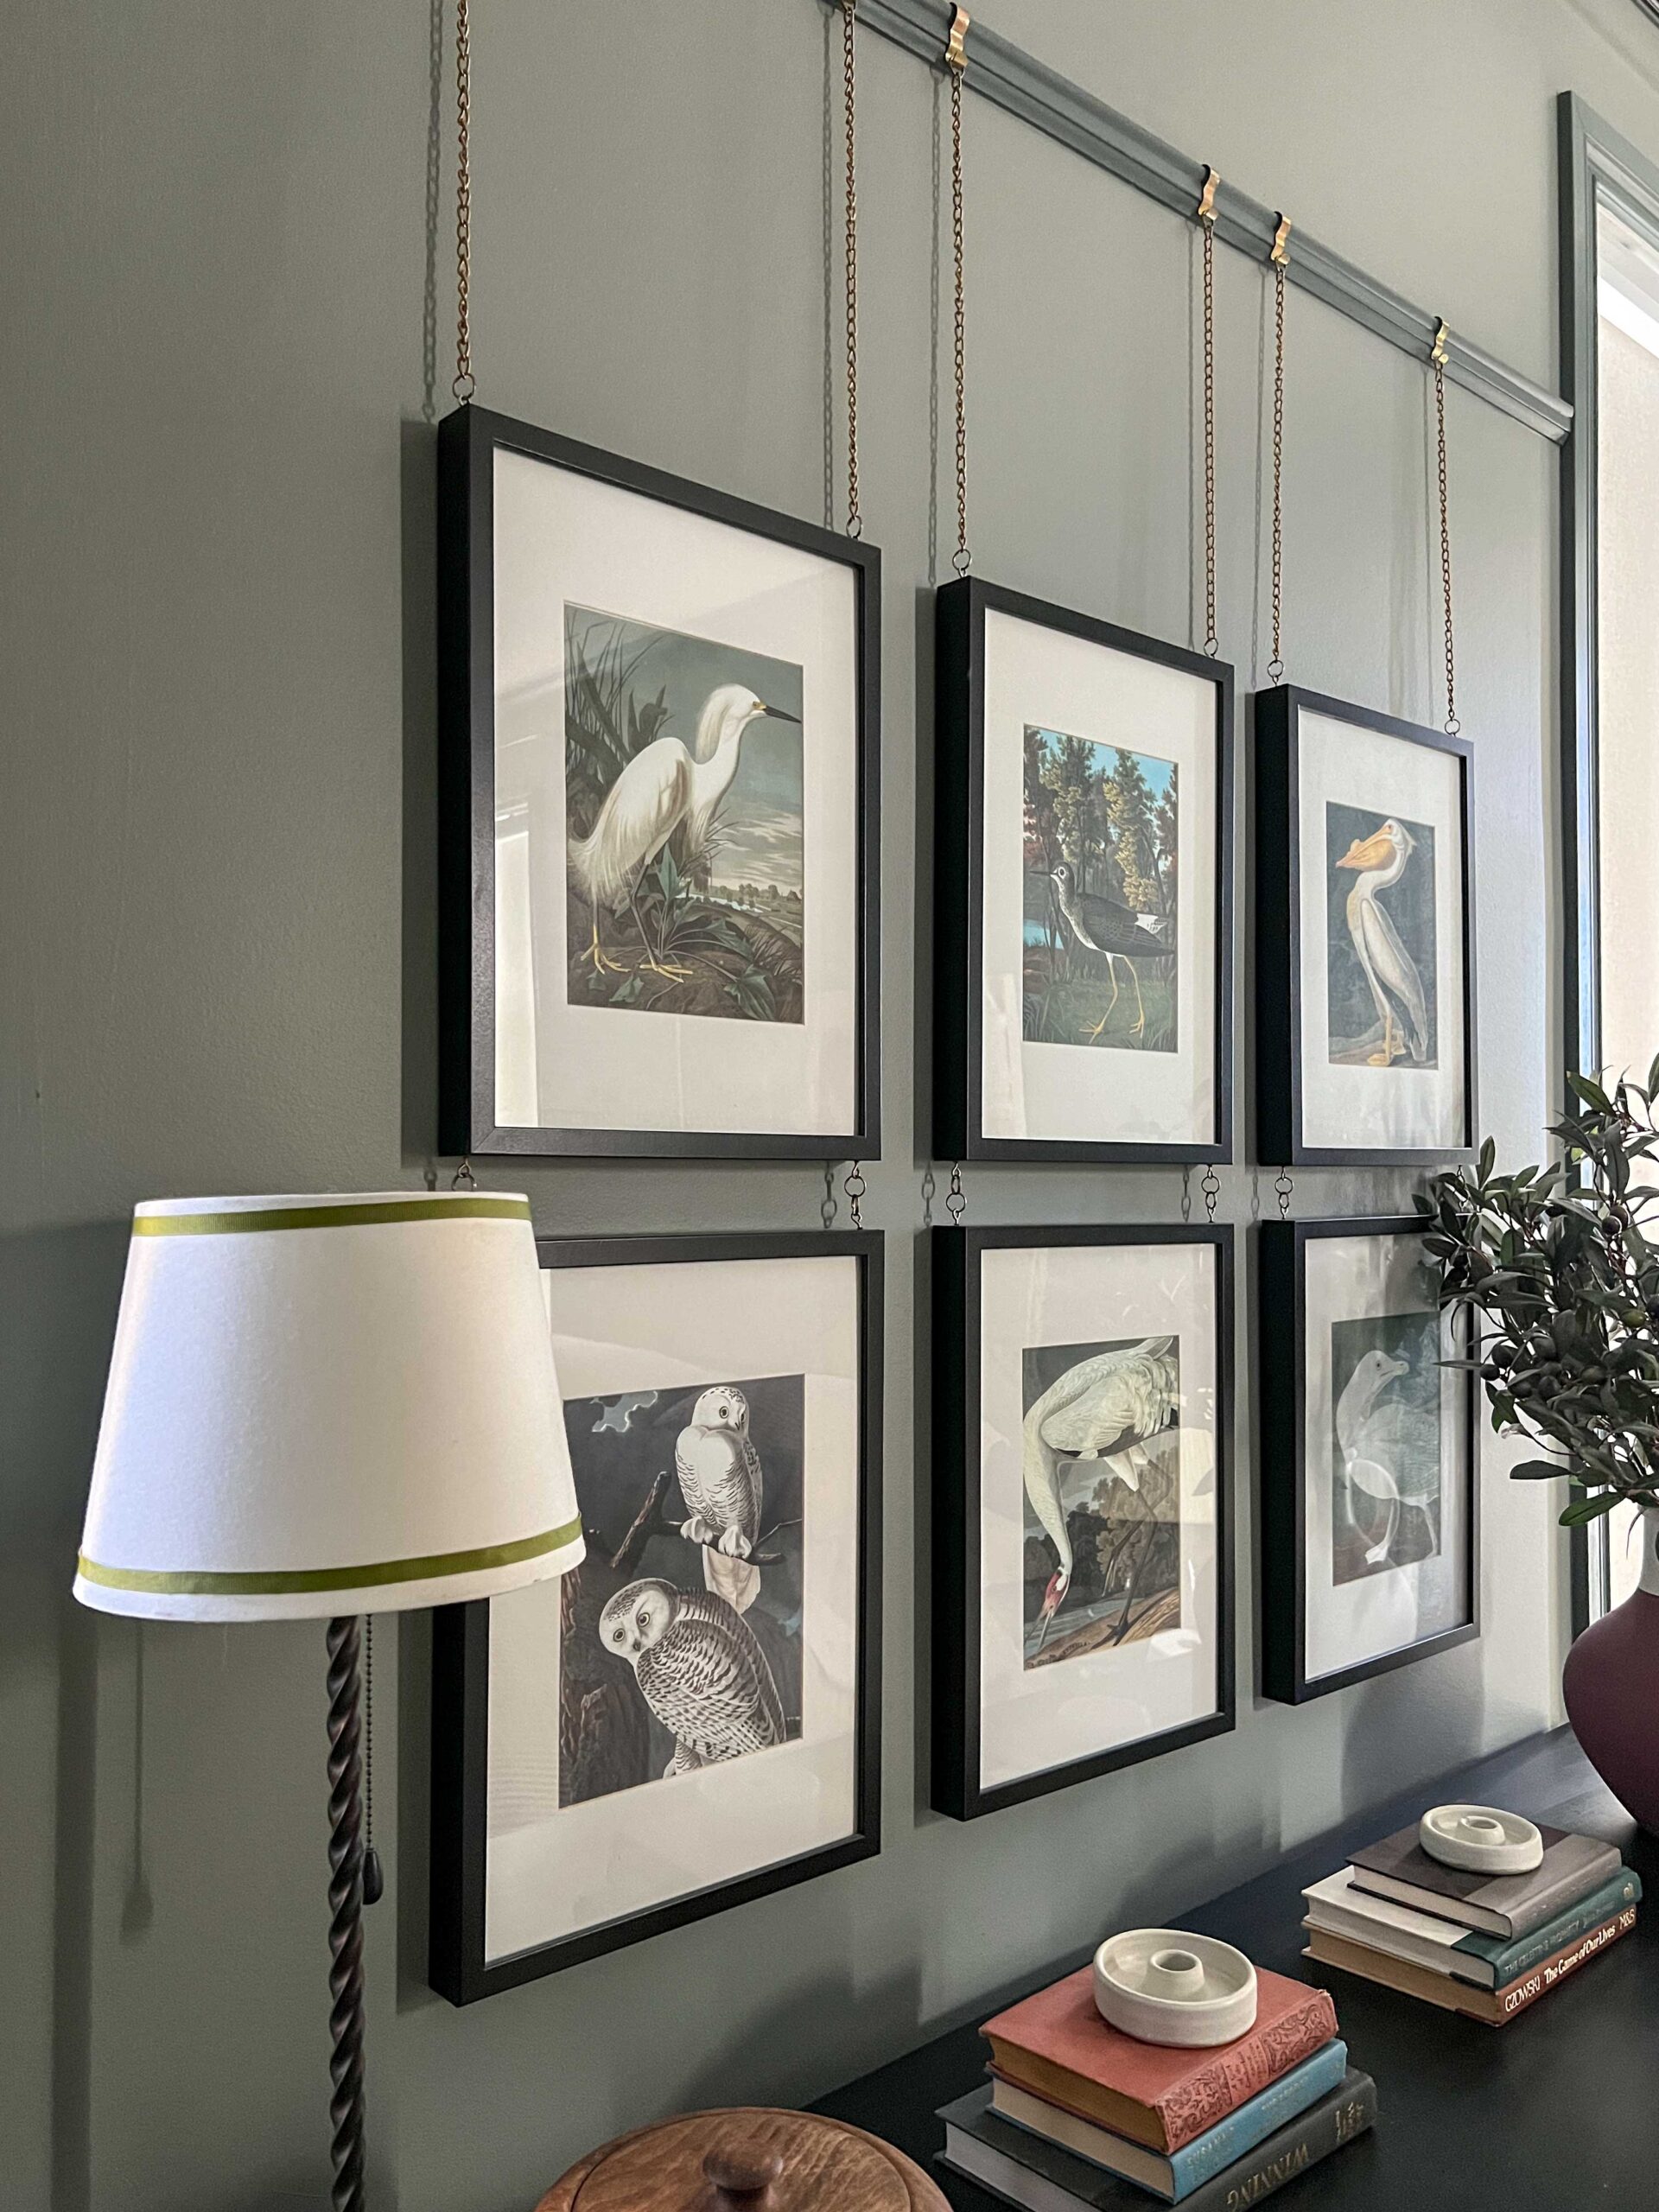 how to hang art on a picture rail using chains